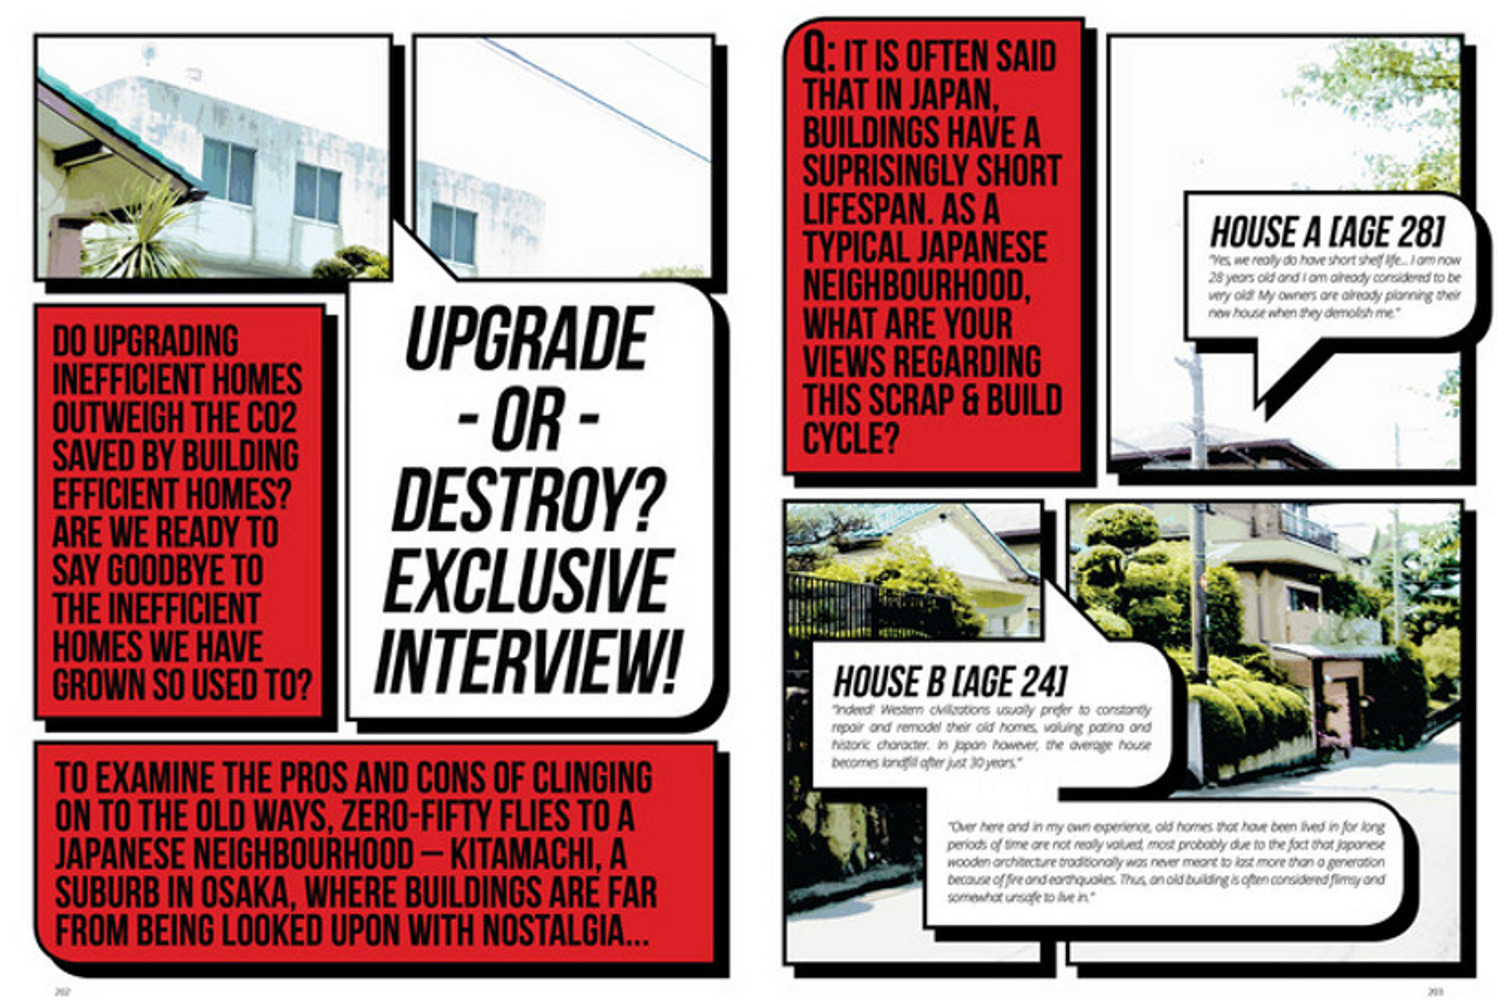 Extract from 'Upgrade or Destroy?'